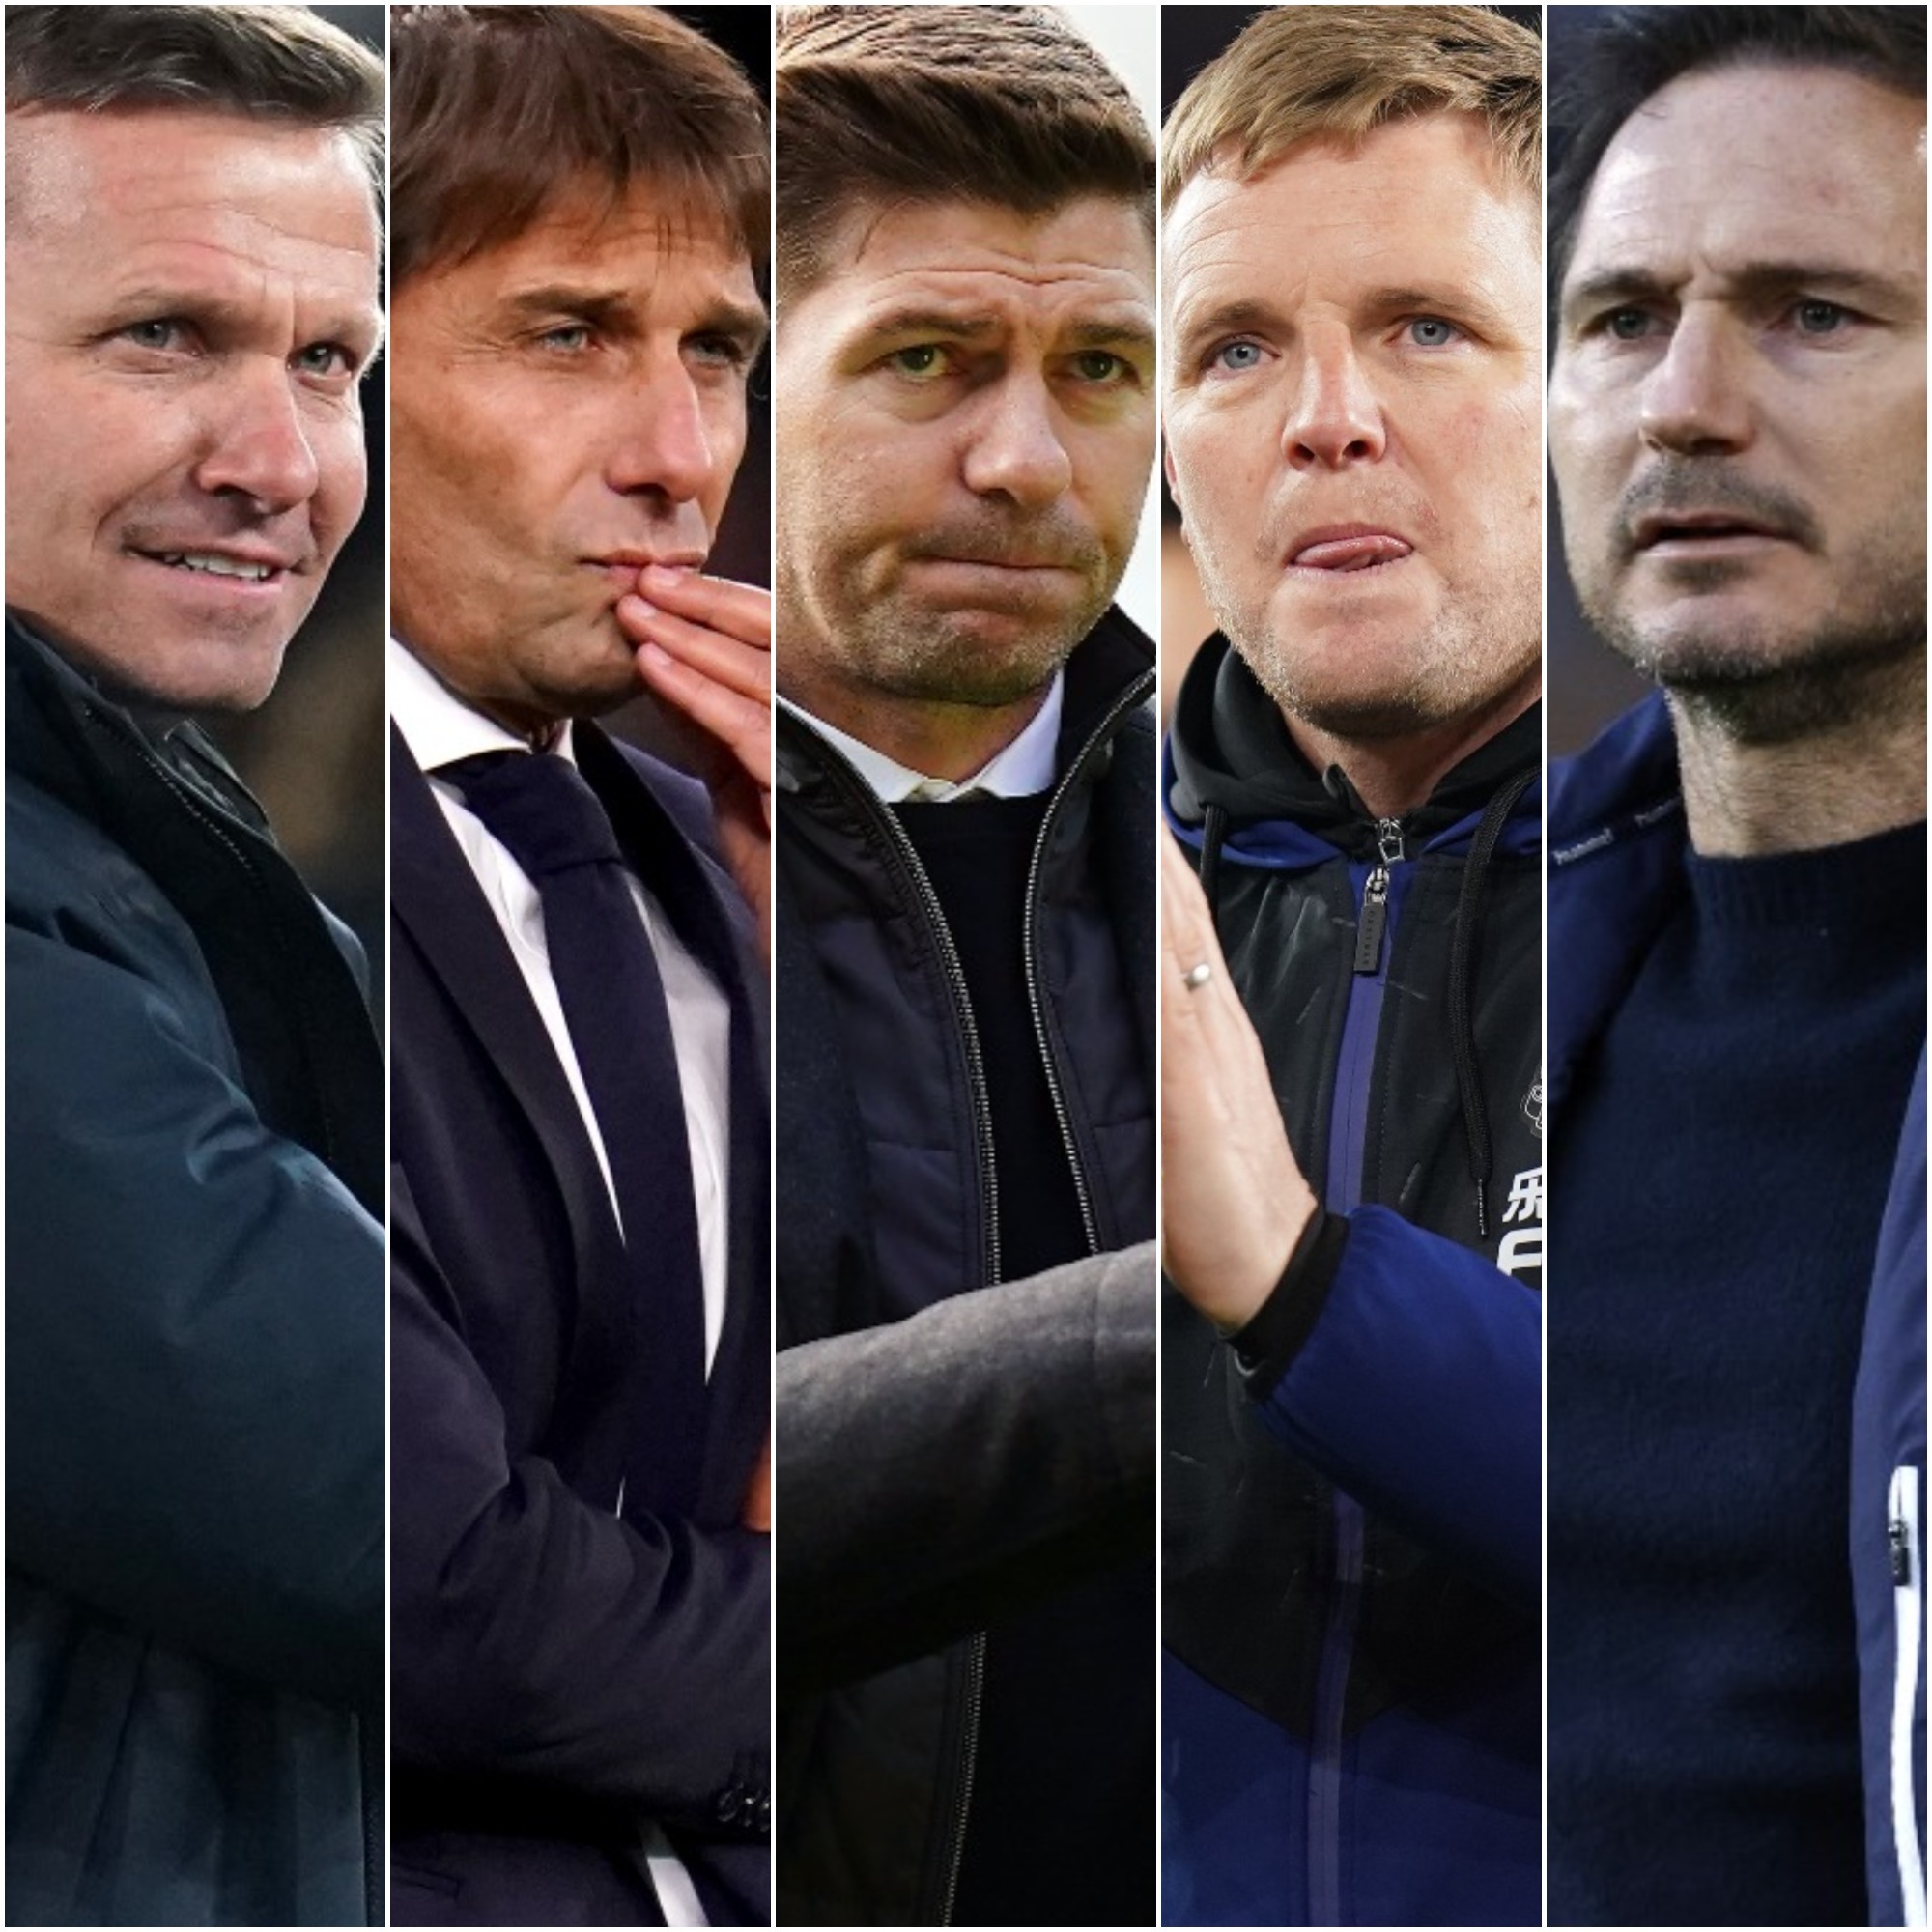 Leeds boss Jesse Marsch, Tottenham's Antonio Conte, Aston Villa manager Steven Gerrard, Newcastle's Eddie Howe and Everton's Frank Lampard, left to right, are preparing for their first full seasons with their current clubs